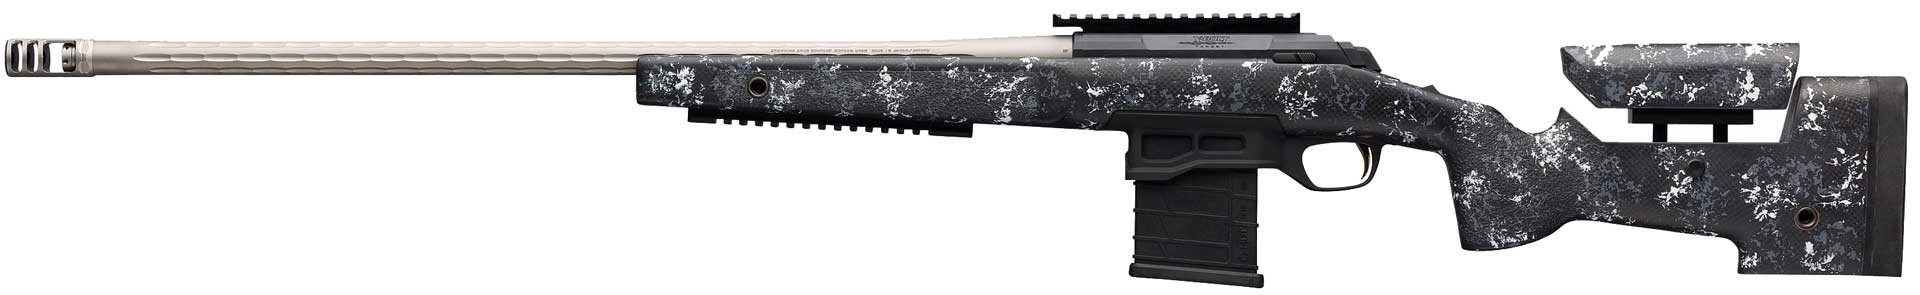 Browning X-Bolt Target Pro McMillan bolt-action rifle left-side view camouflage dark silver stainless steel barrel blued receiver